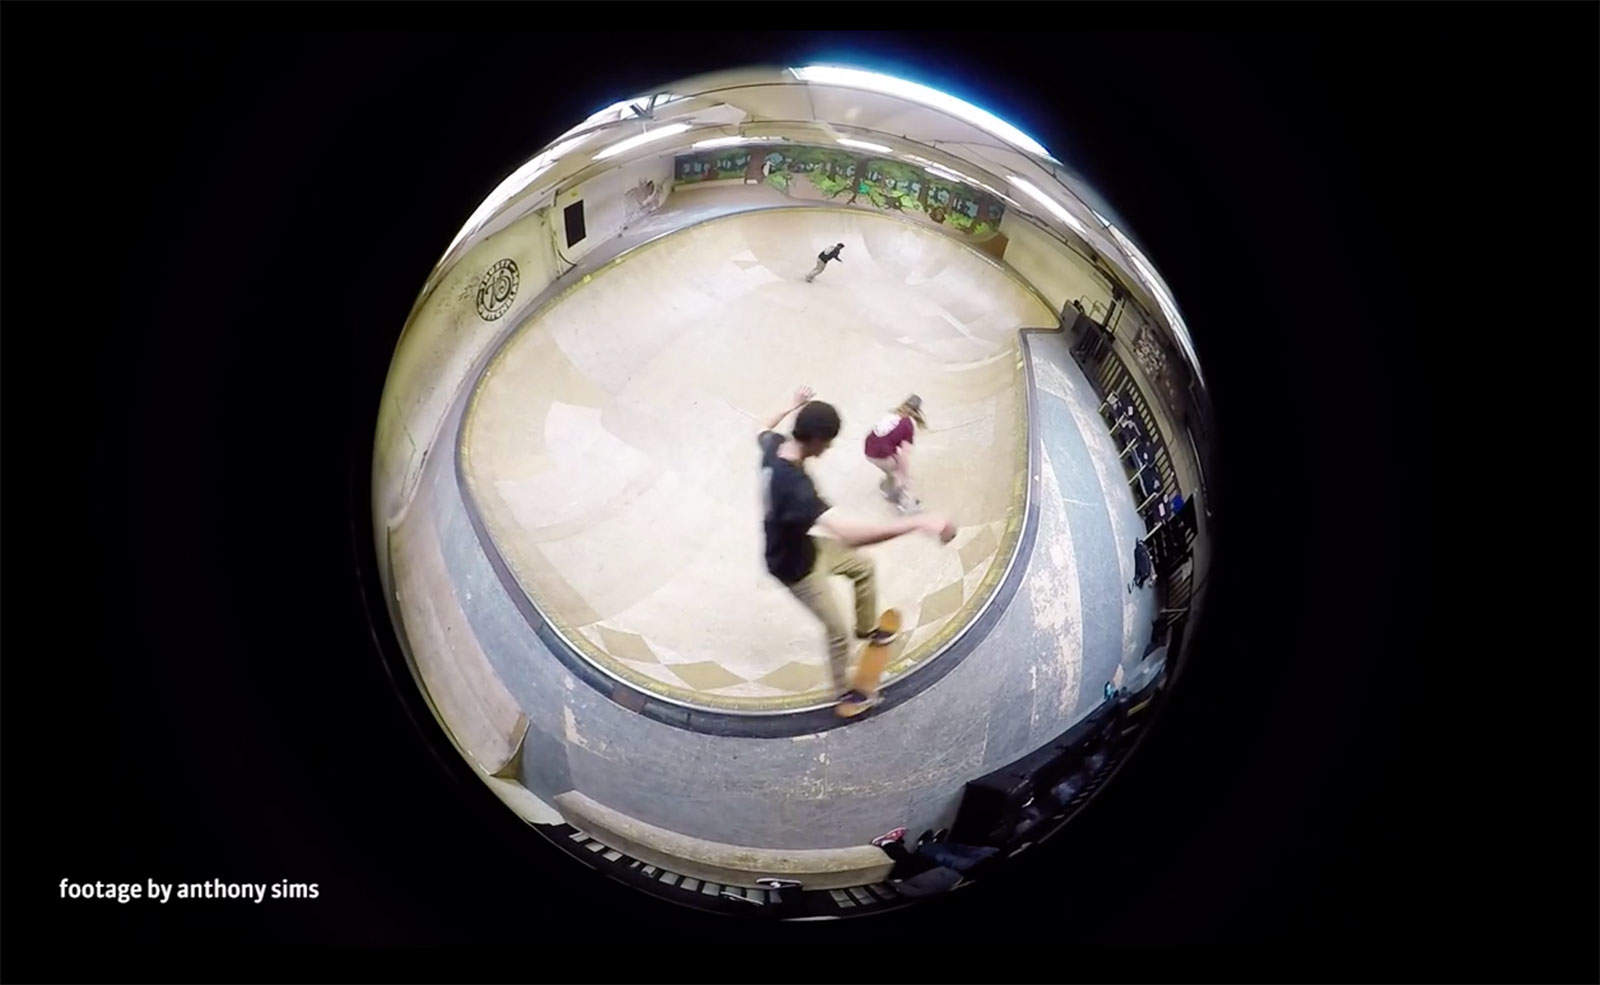 How's that for perspective? Lensbaby gives your GoPro camera a new view.